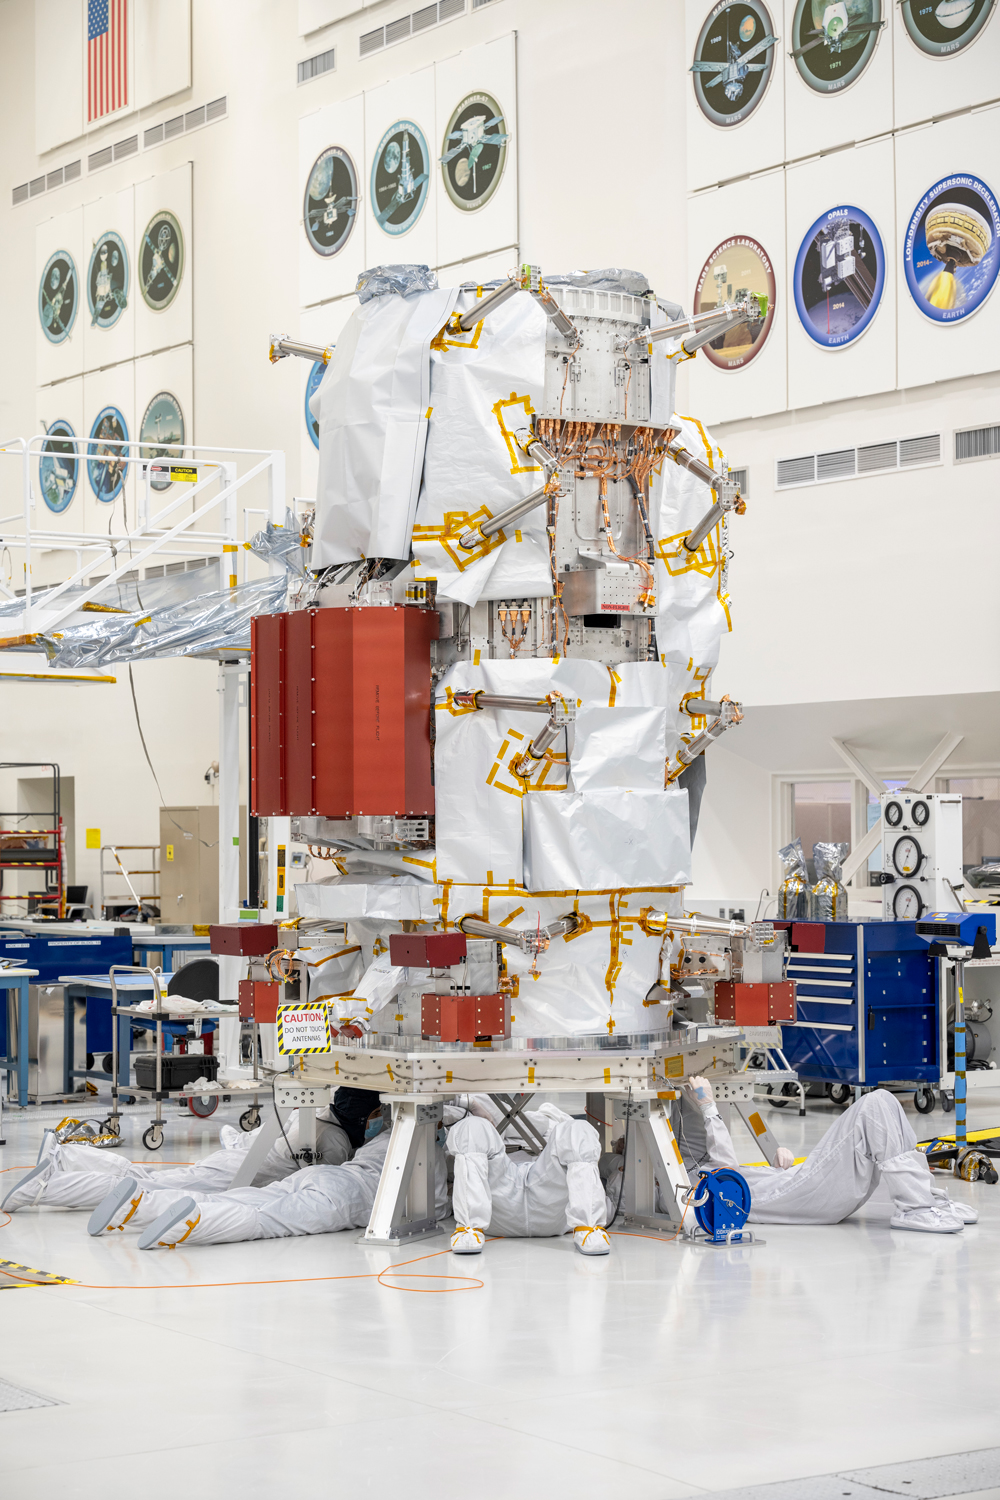 The main body of the spacecraft standing in a white clean room is the central component of this image. The tall structure is covered with protective covers to keep sensitive equipment safe during assembly and what looks like white paper, which is being used for patterning for the spacecraft’s protective insulation. Four engineers are seen under the base of the spacecraft, where they are installing the reaction wheels, as if they are working on the undercarriage of a car. Two engineers on the left are on their stomachs, and two engineers on the right are on their back. 